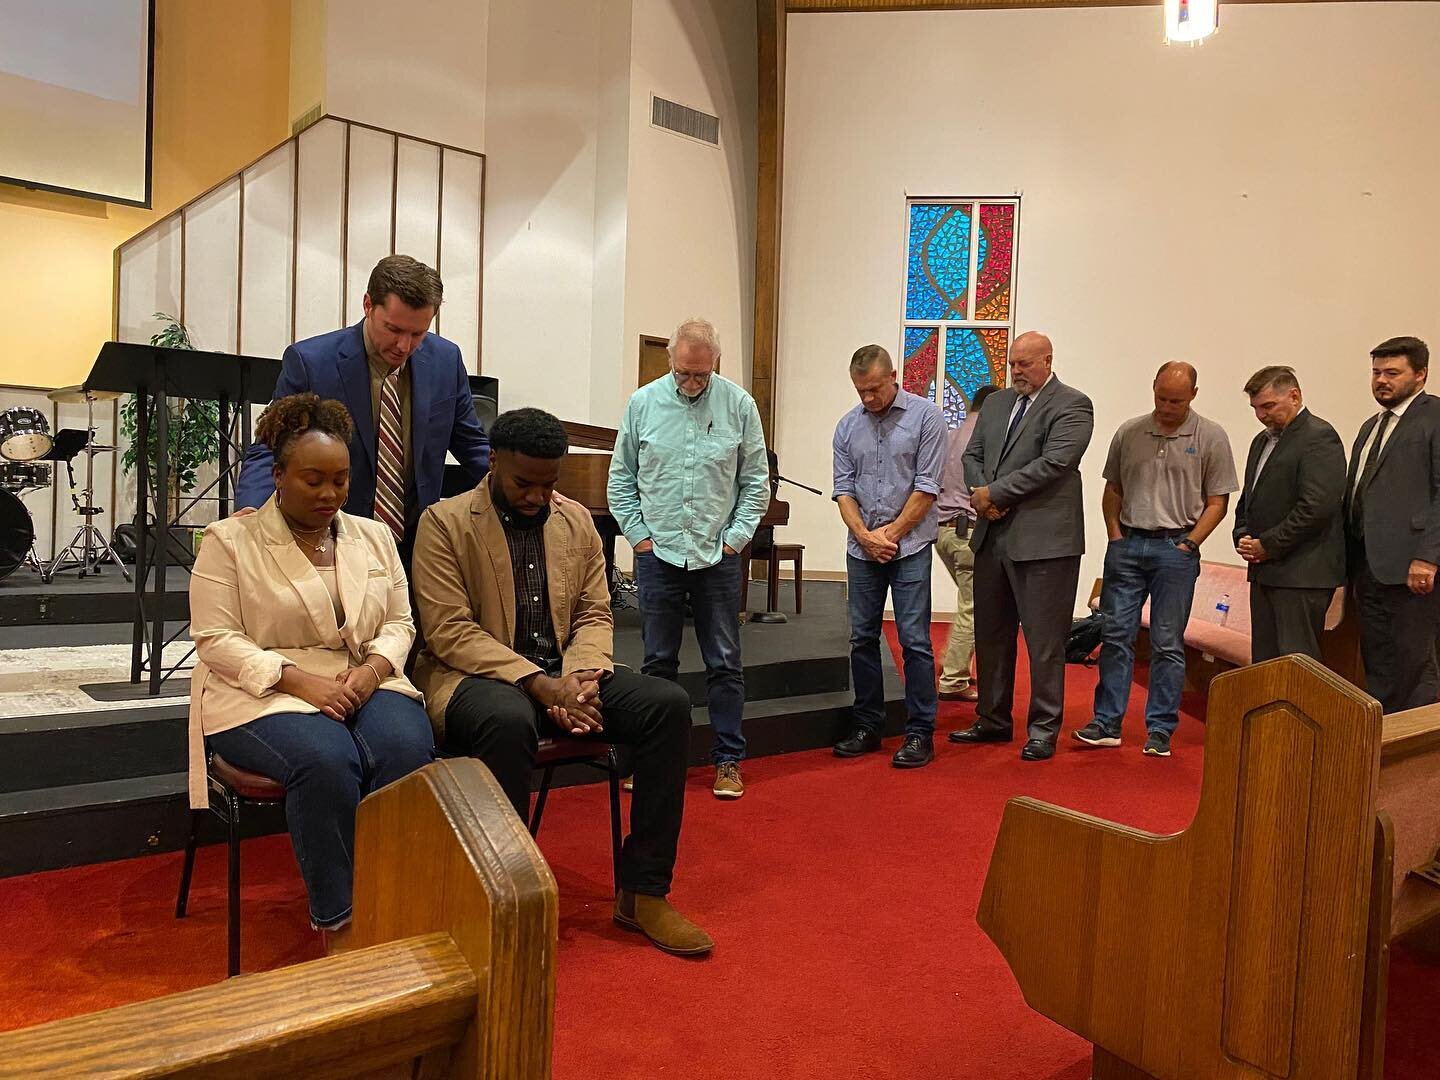 Here&rsquo;s some more pictures form the ordination ceremony! #onefamilychurch #daytonchurches #church937 #gospelcenteredchurch #multiculturalchruch #churchplanting #daytonohio #dayton